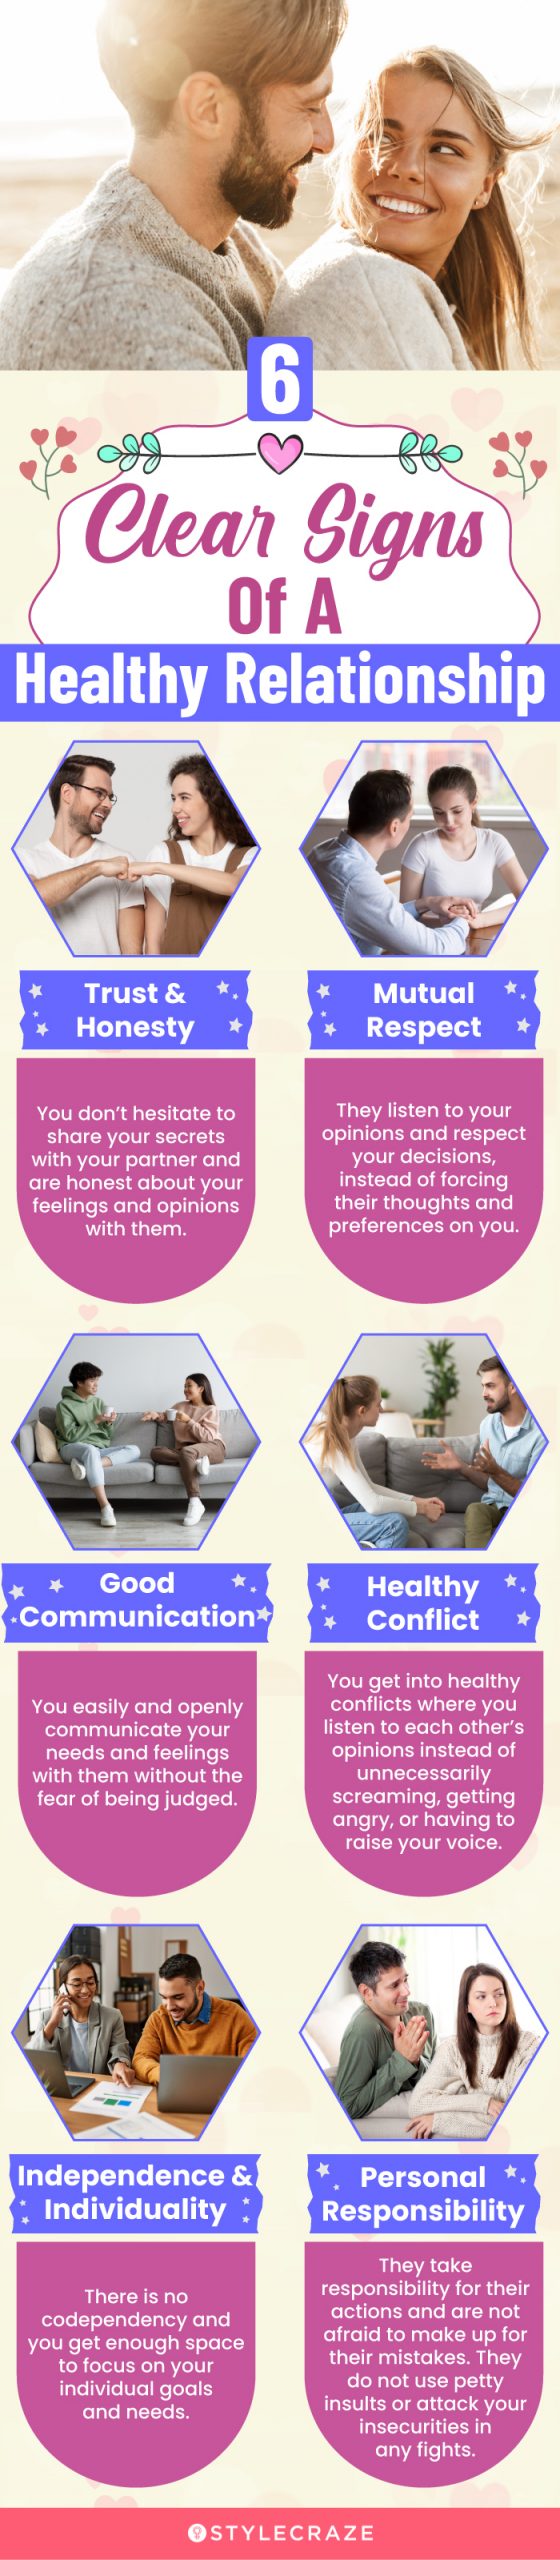 6 clear signs of a healthy relationship (infographic)